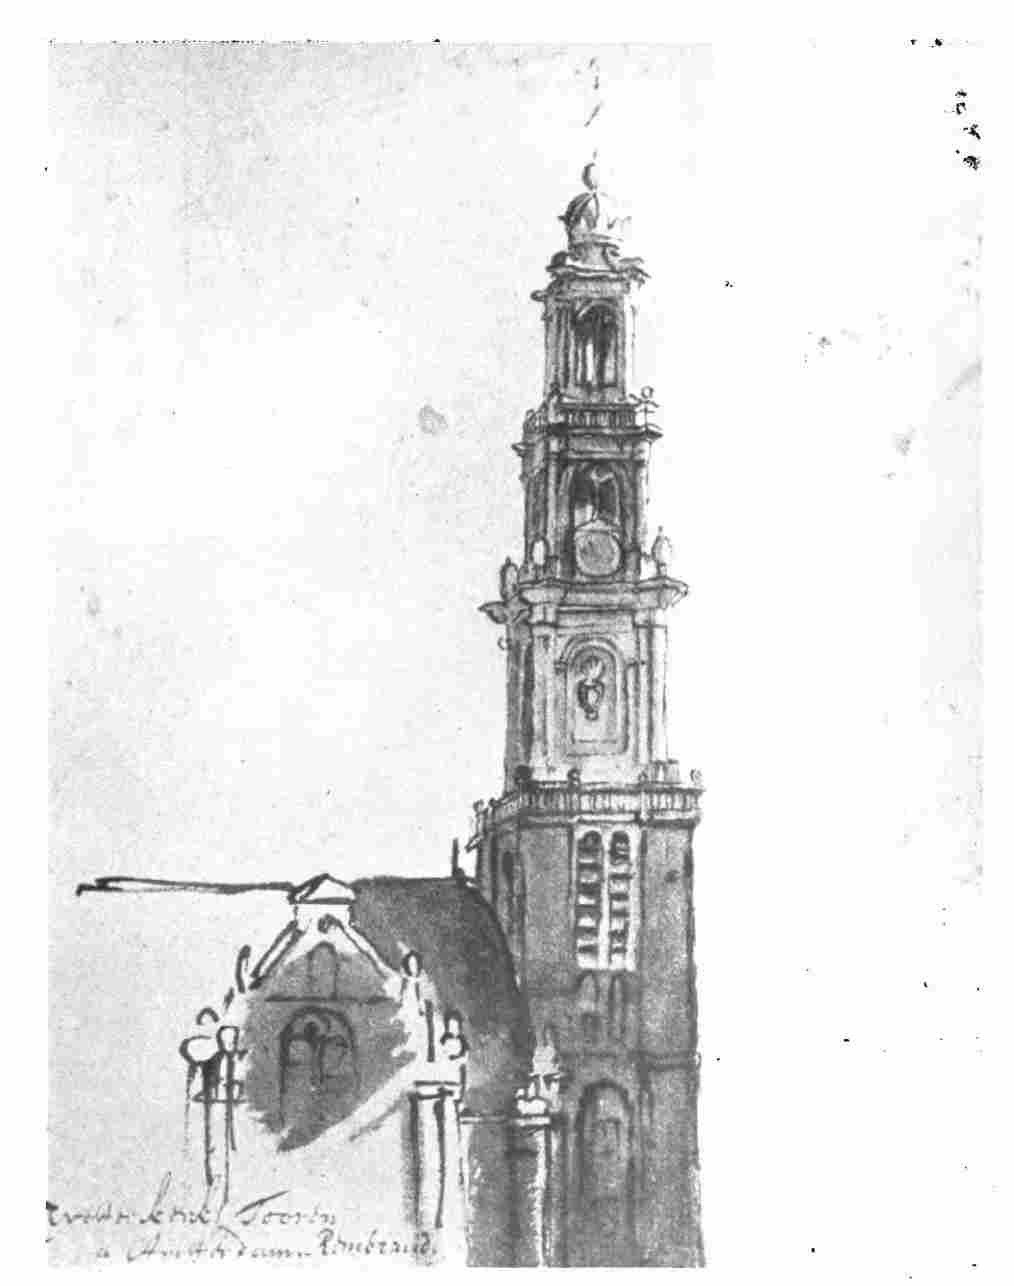 Plate 13. The Tower Called “Westertoren” In Amsterdam.